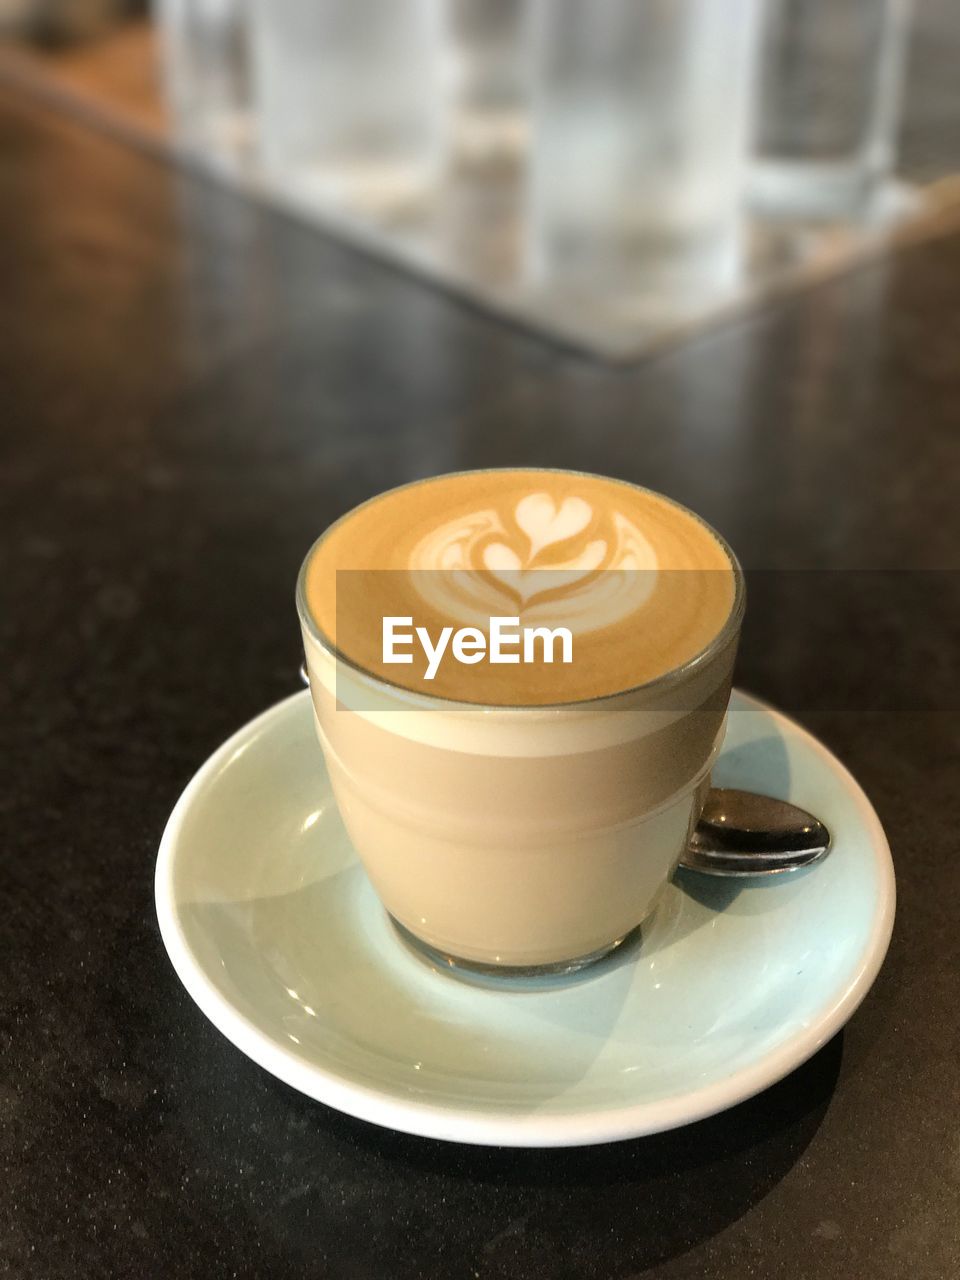 CLOSE-UP OF CAPPUCCINO SERVED ON TABLE